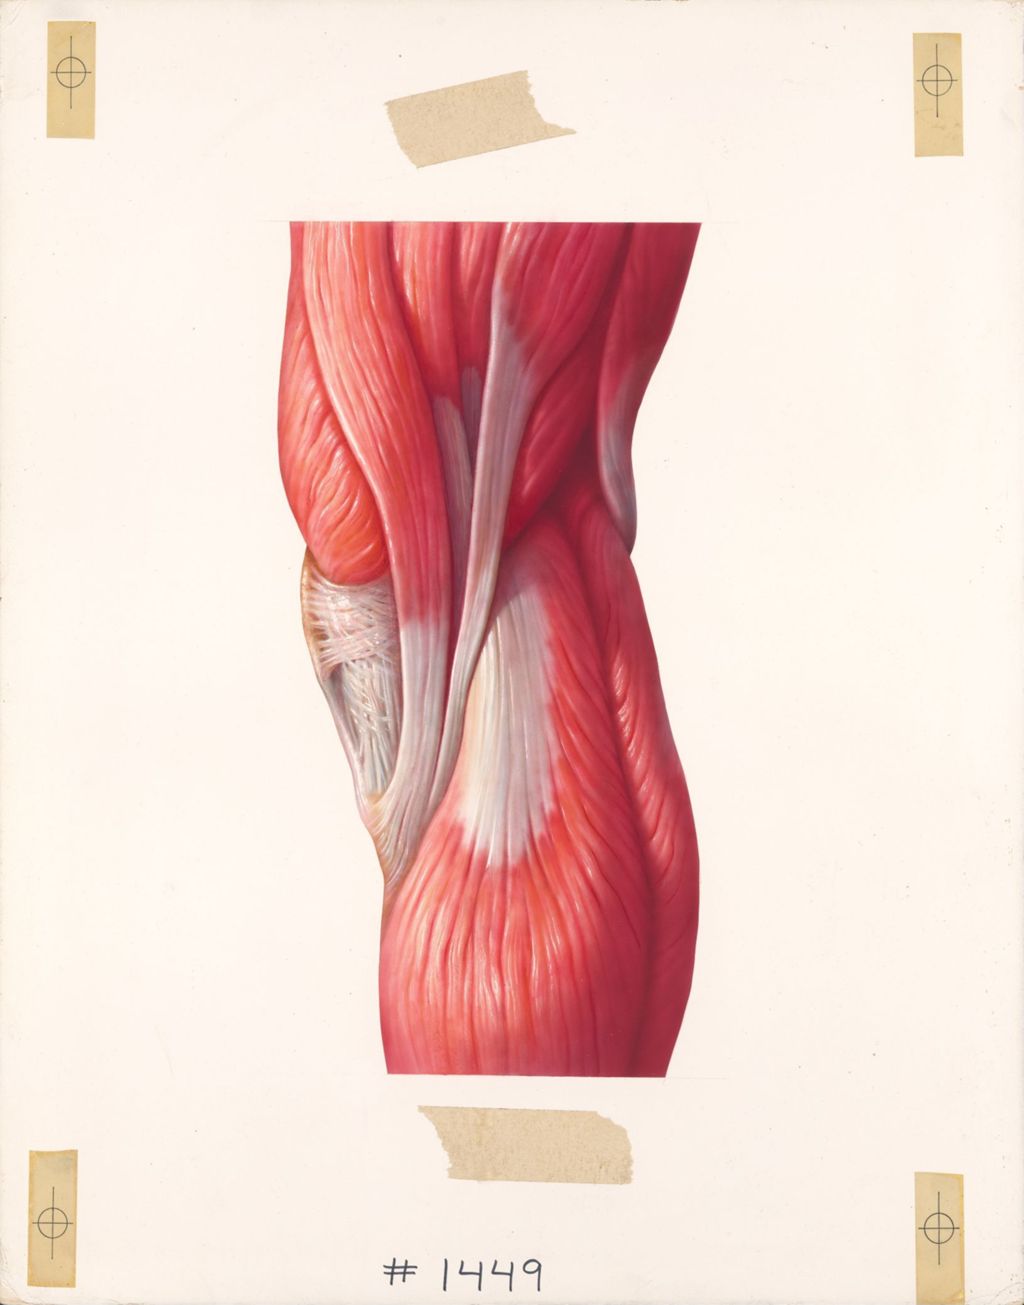 Miniature of The knee, The musculature of the knee, posteromedial aspect